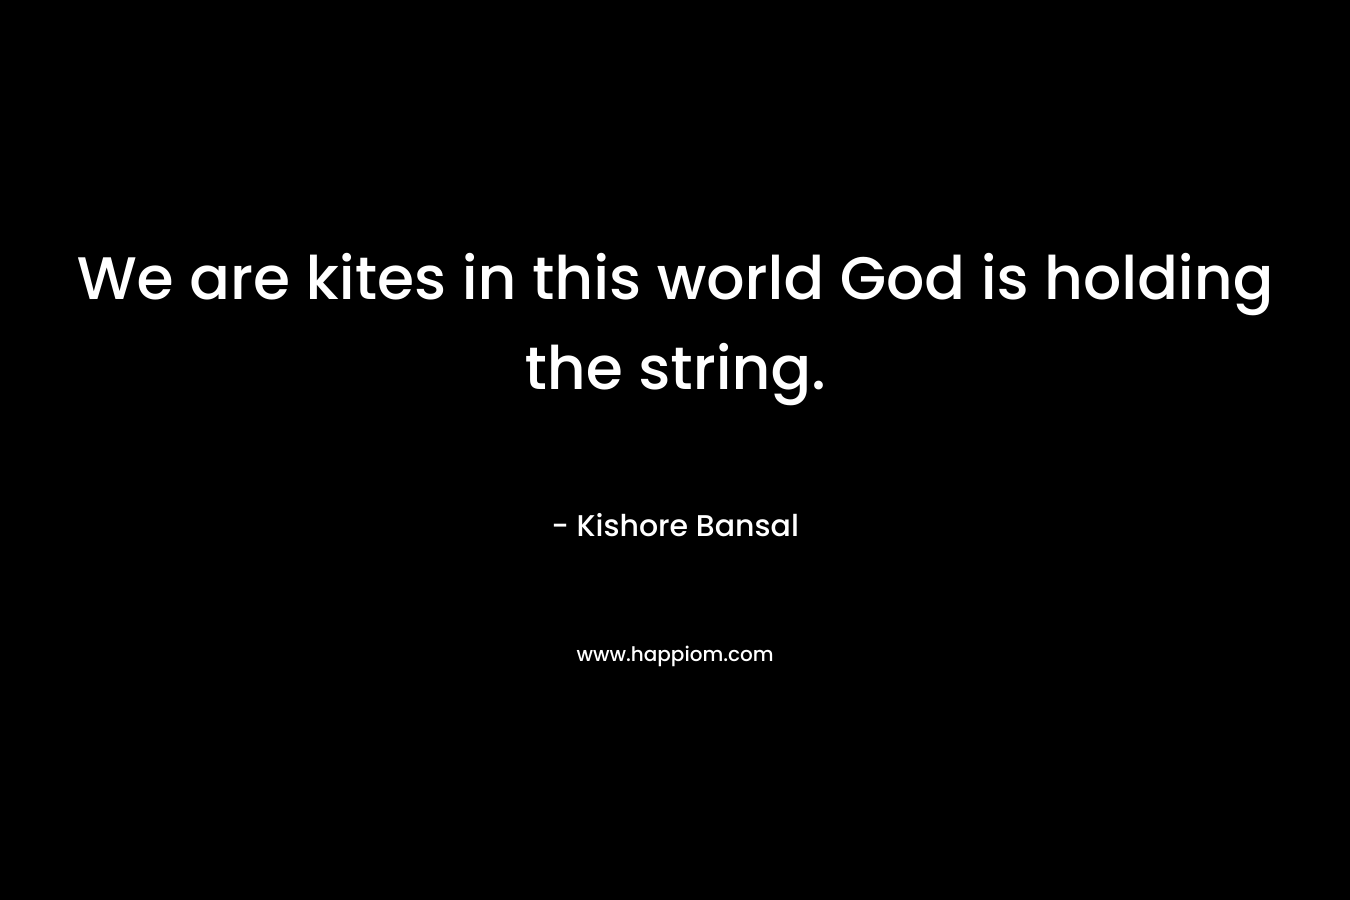 We are kites in this world God is holding the string. – Kishore Bansal